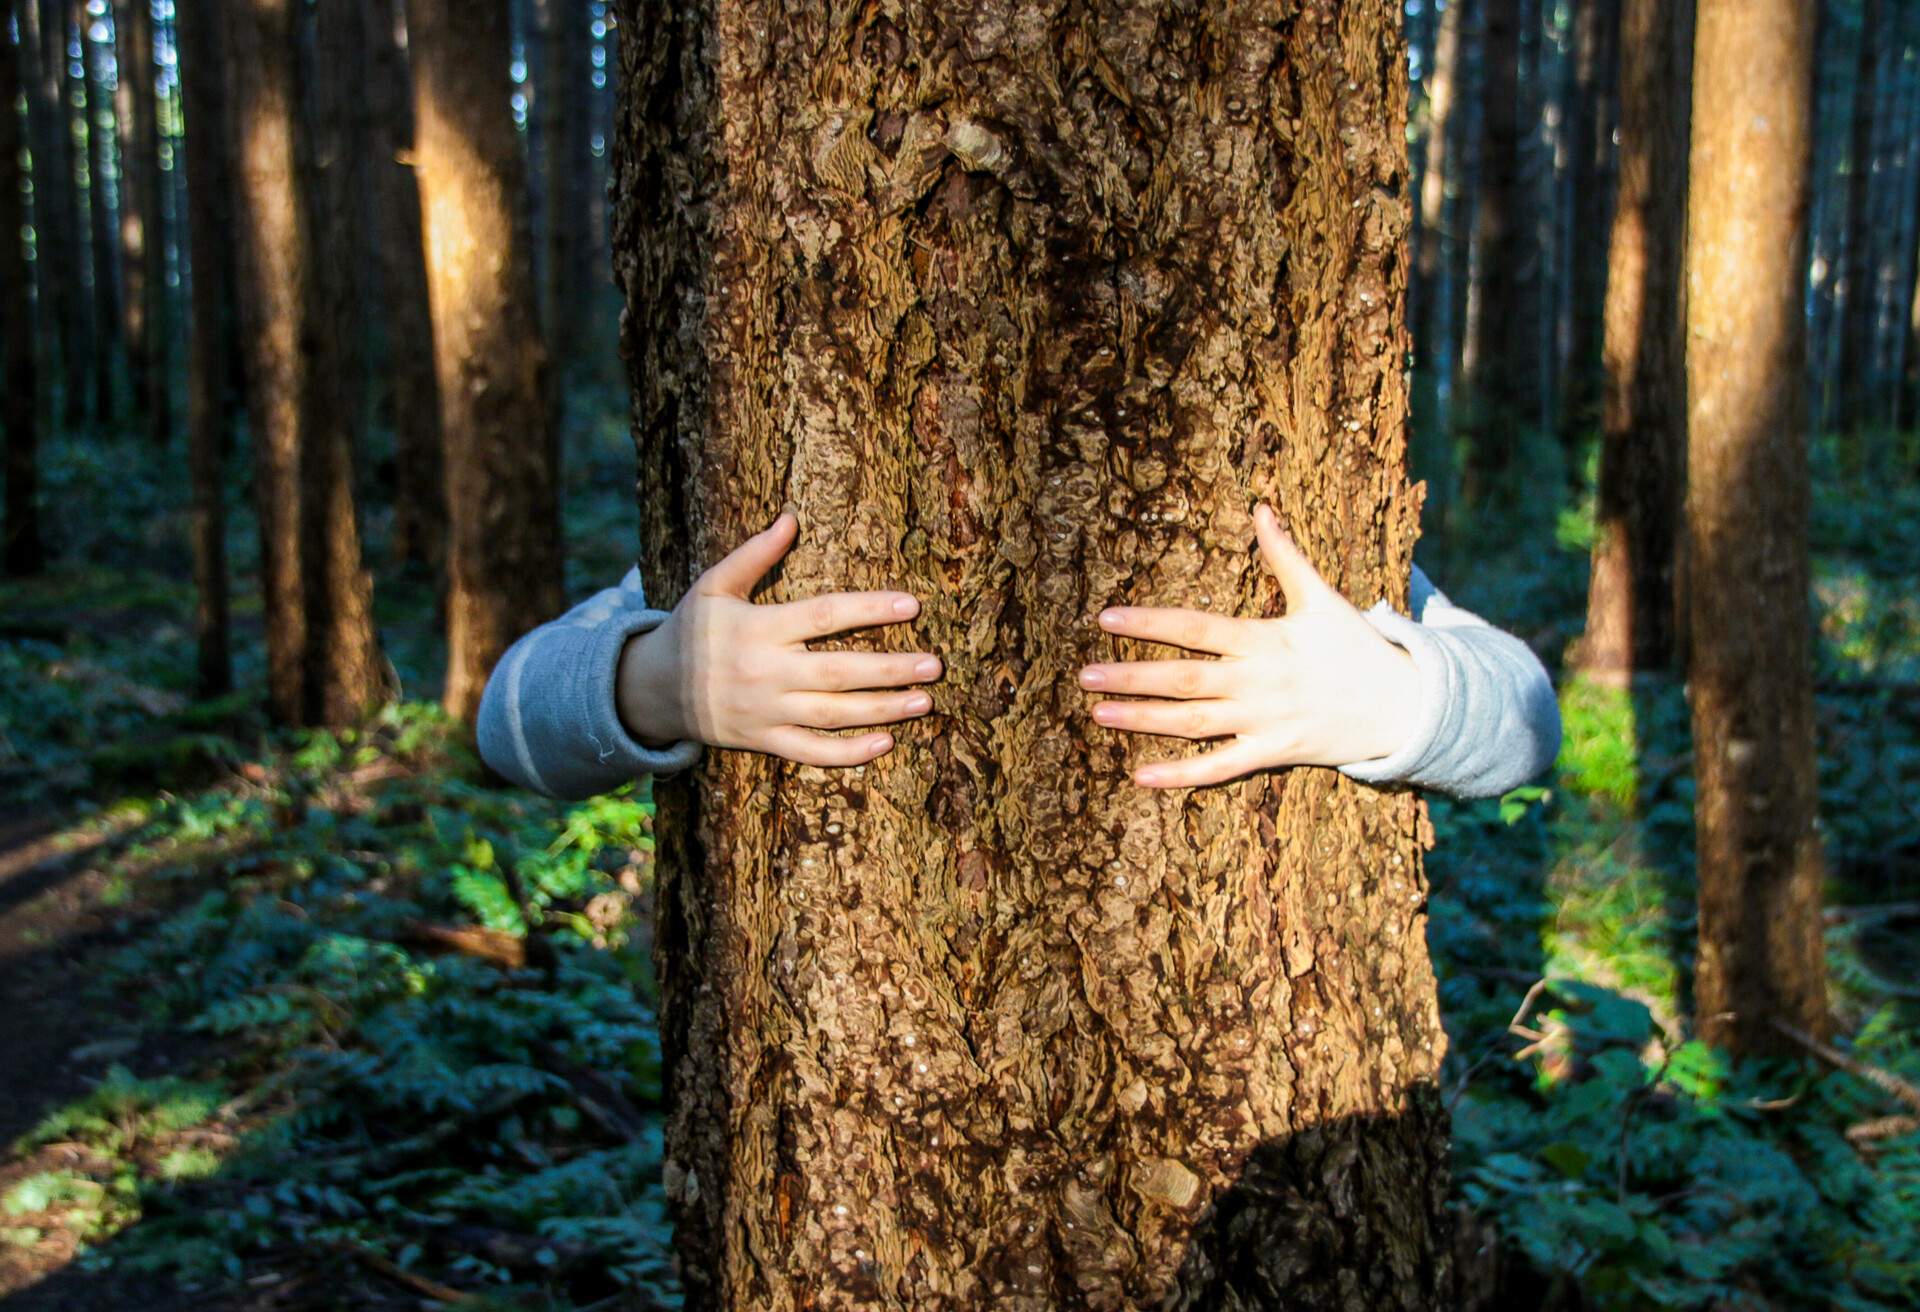 NATURE_FOREST_TREE_HUG_PERSON